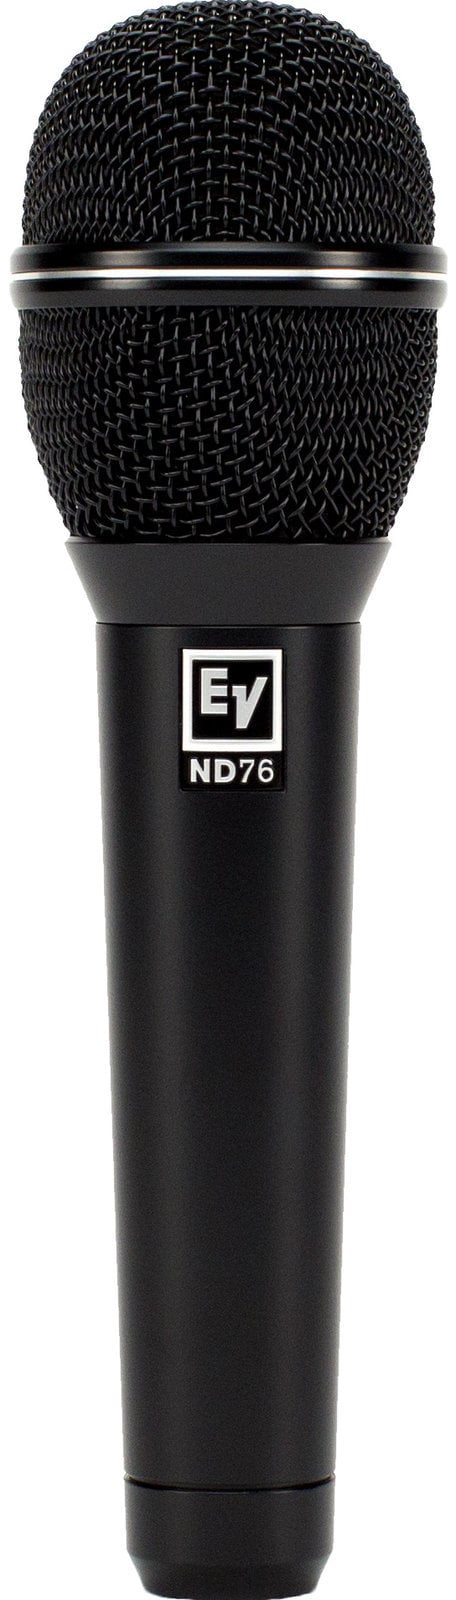 Vocal Dynamic Microphone Electro Voice ND76 Vocal Dynamic Microphone